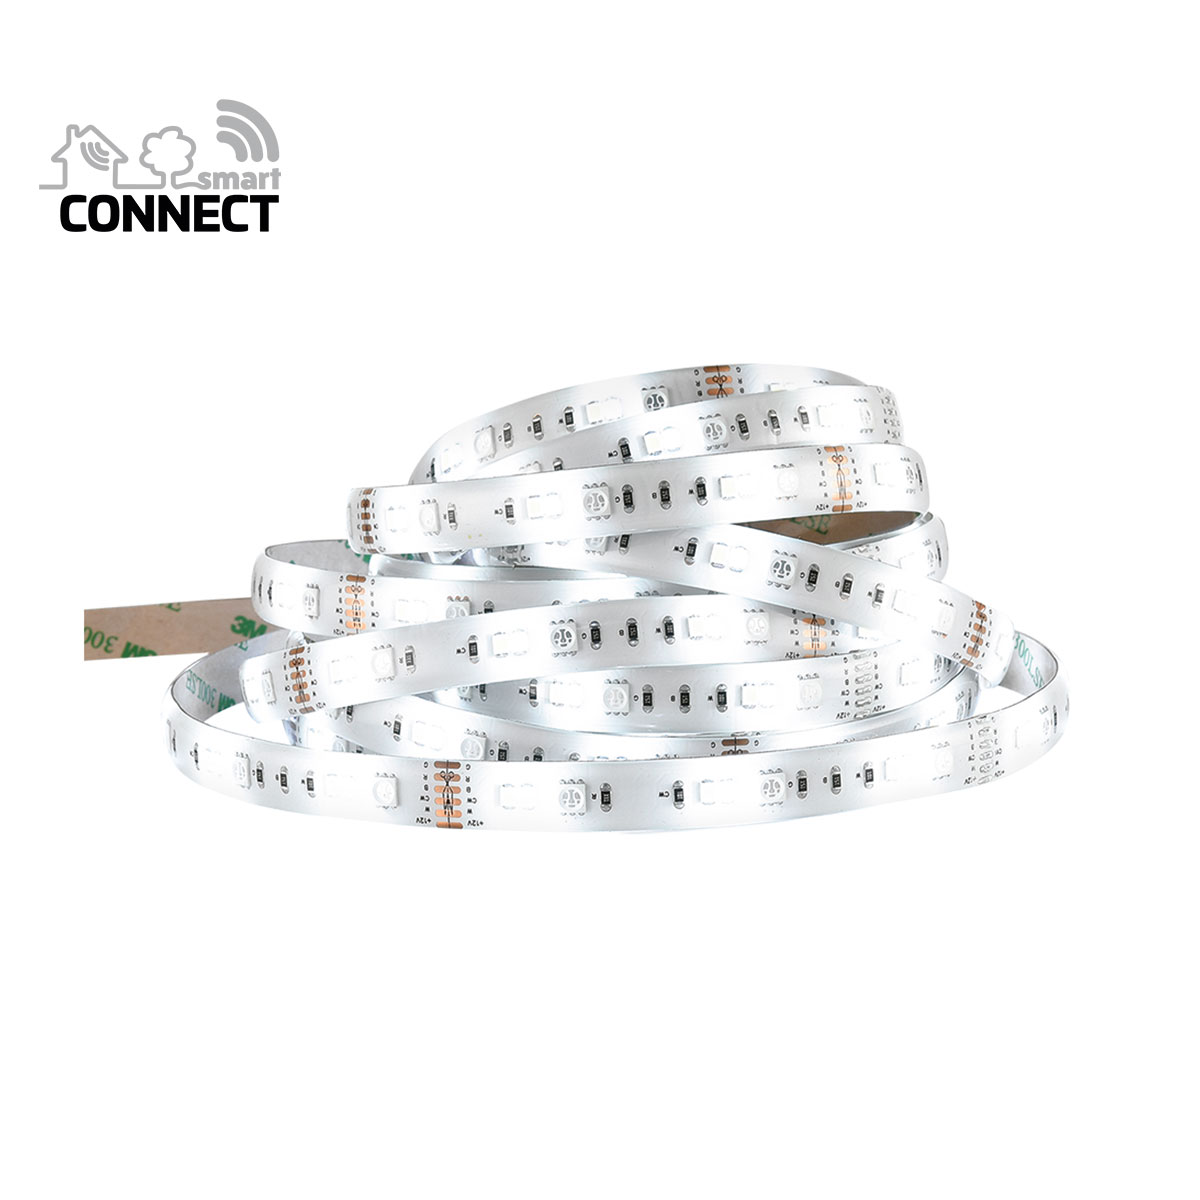 Flector LED-Lichtband Smart Connect 5m weiß | 270381